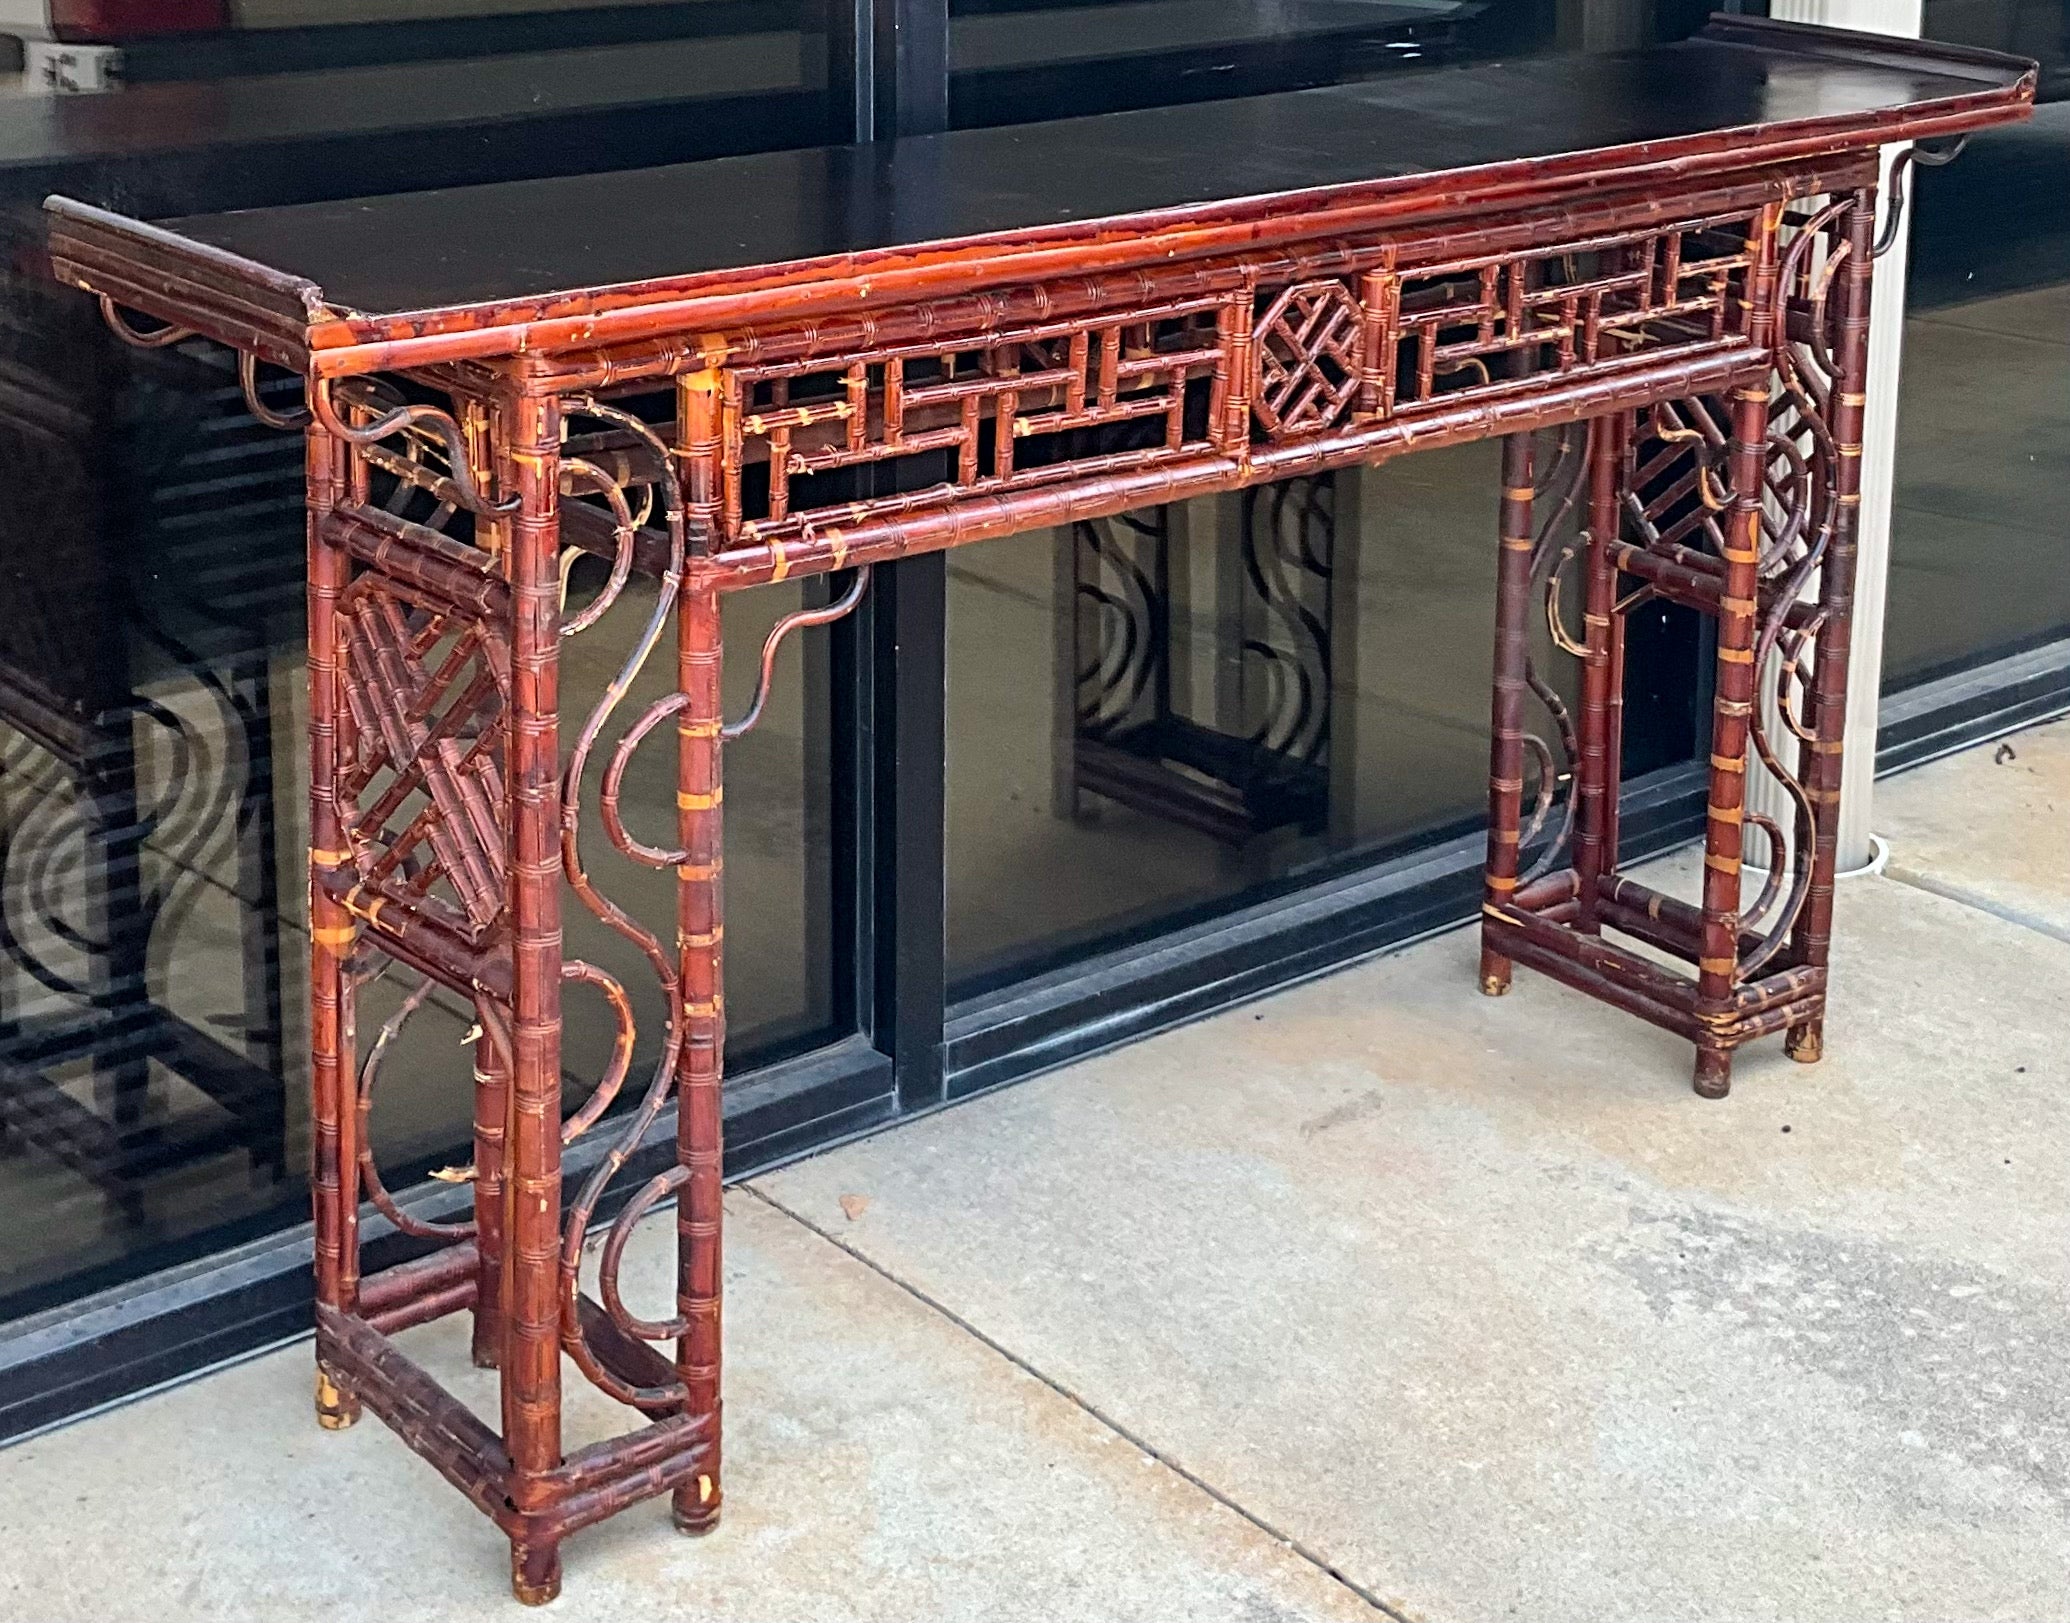 This is a 19th century Chinese bamboo altar table with ebonized wood top. It has elaborate scrolled fretwork. This piece has age appropriate wear.

My shipping is for the Continental US only and can run 2 to 5 weeks. Please let me know if you need